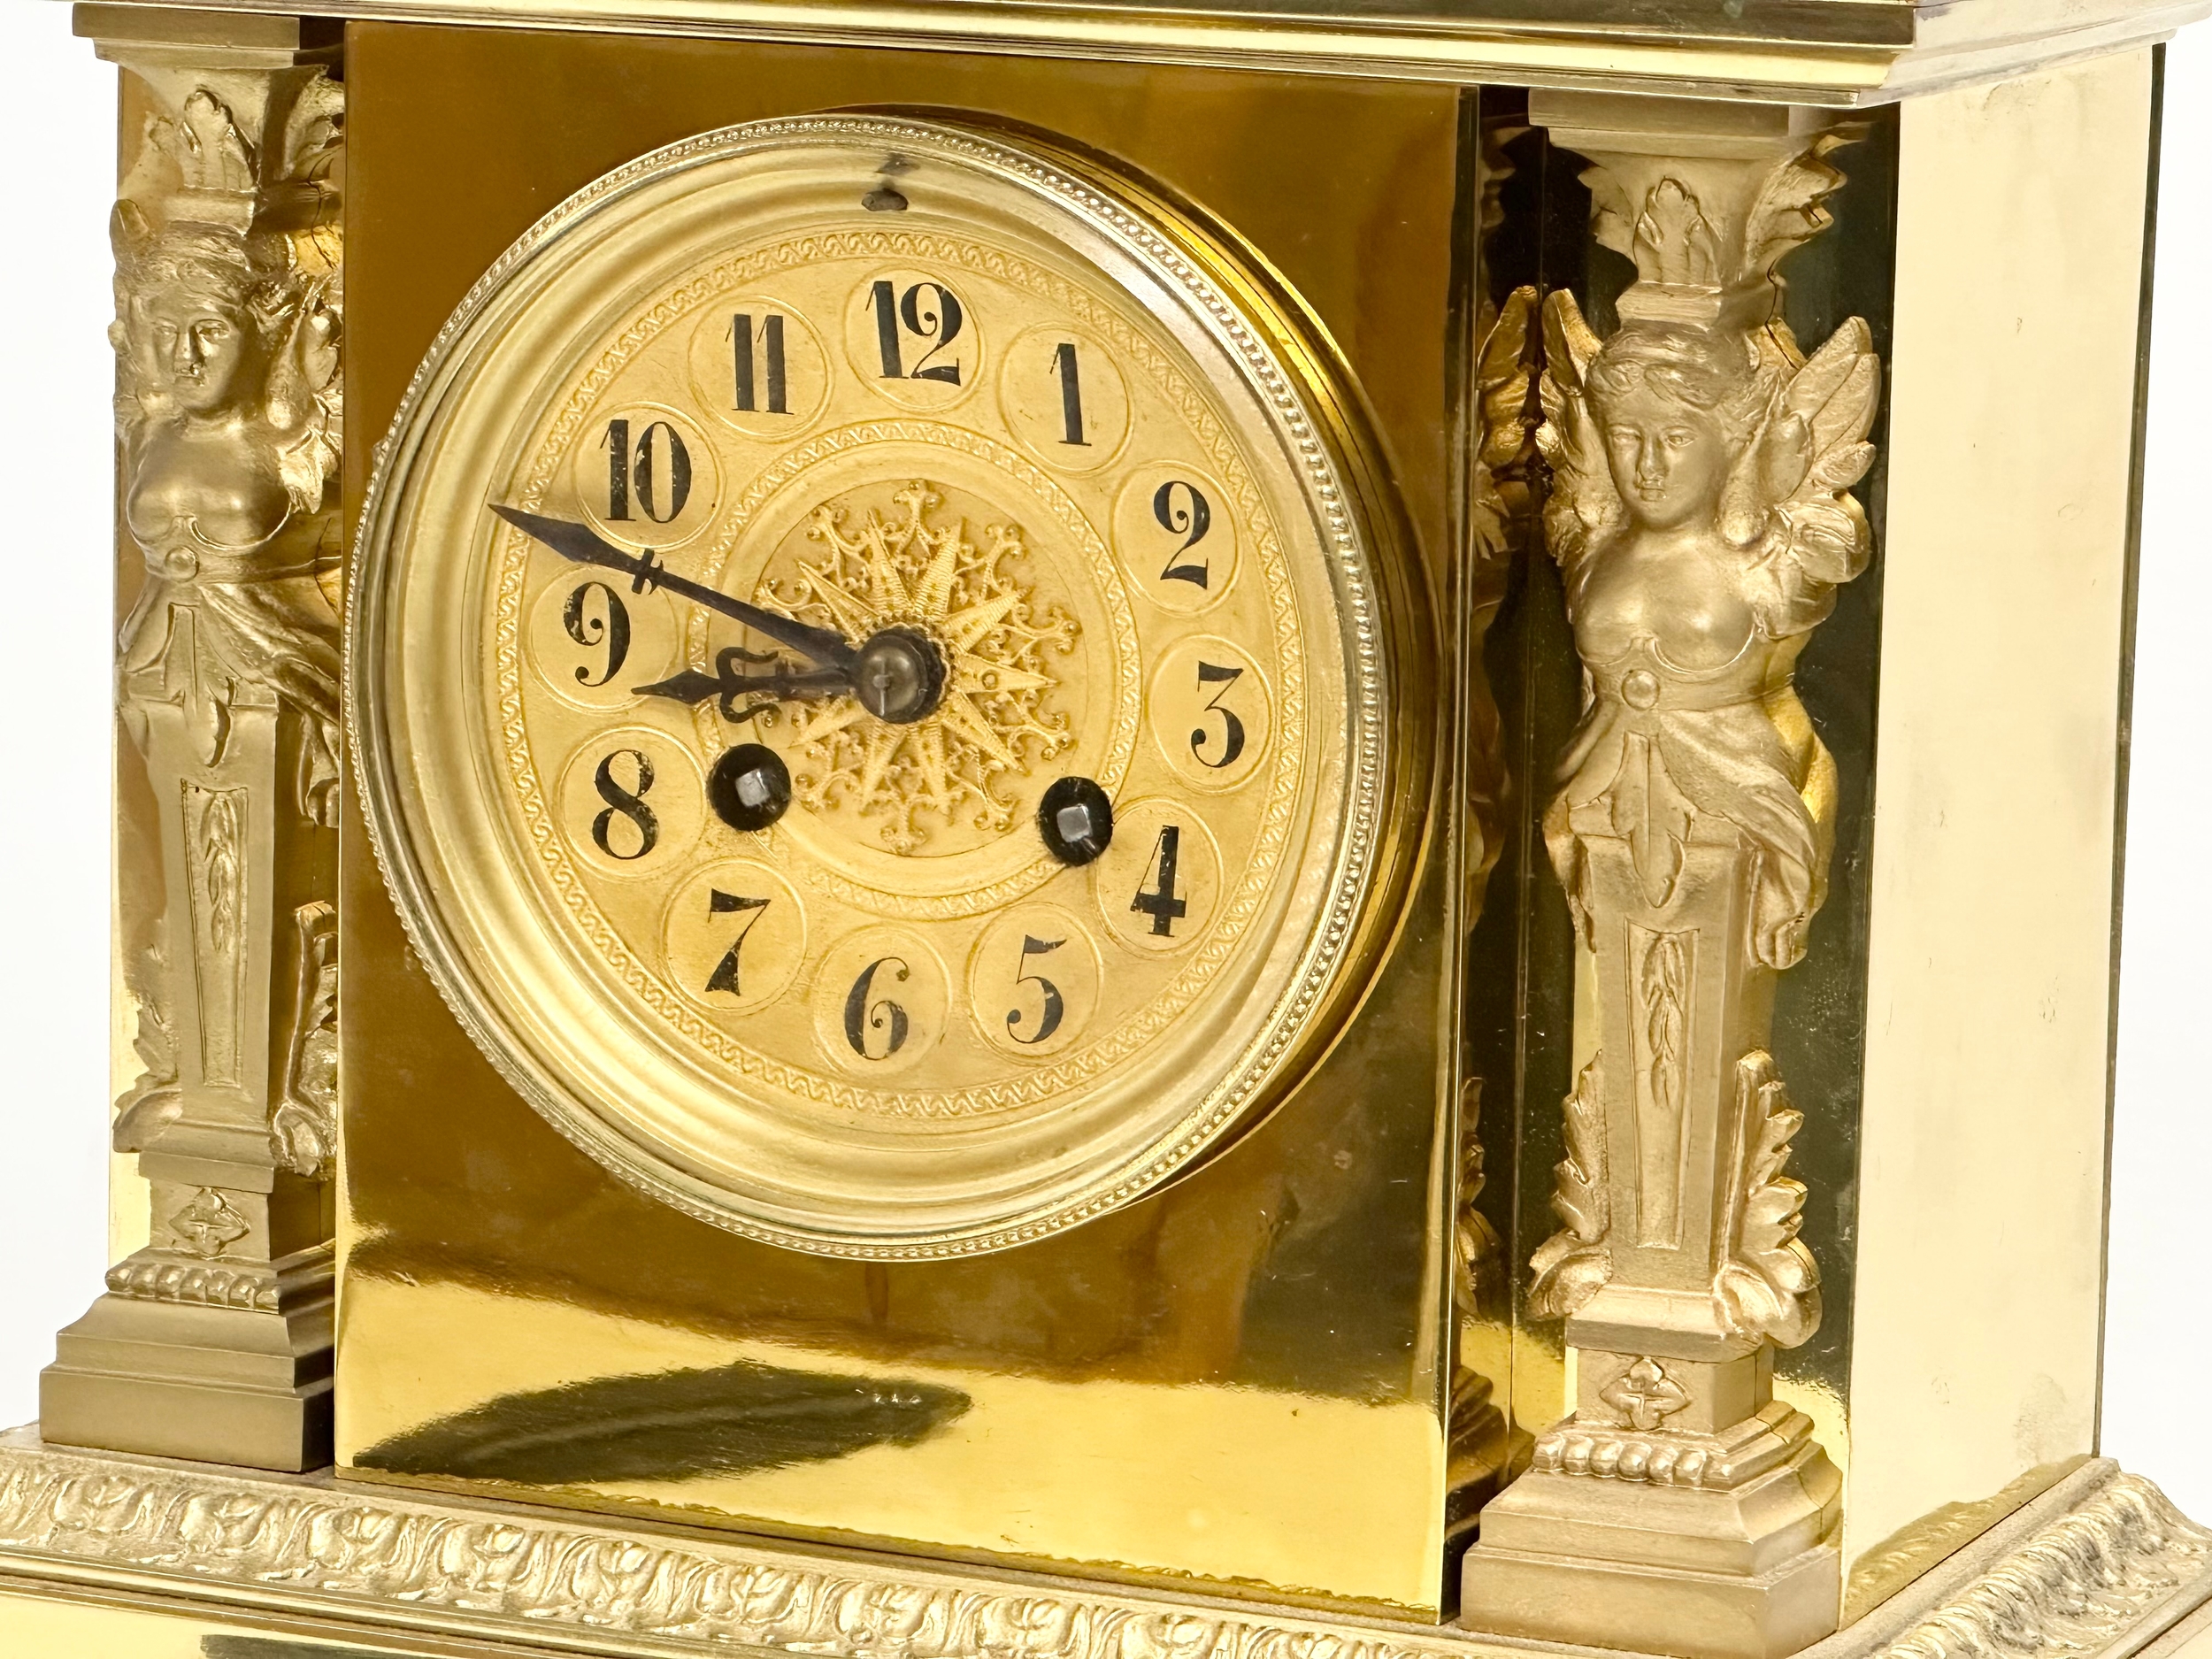 A late 19th century French brass mantle clock on stand. L. Marti Medaille D’Argent 1889. With key - Image 3 of 9